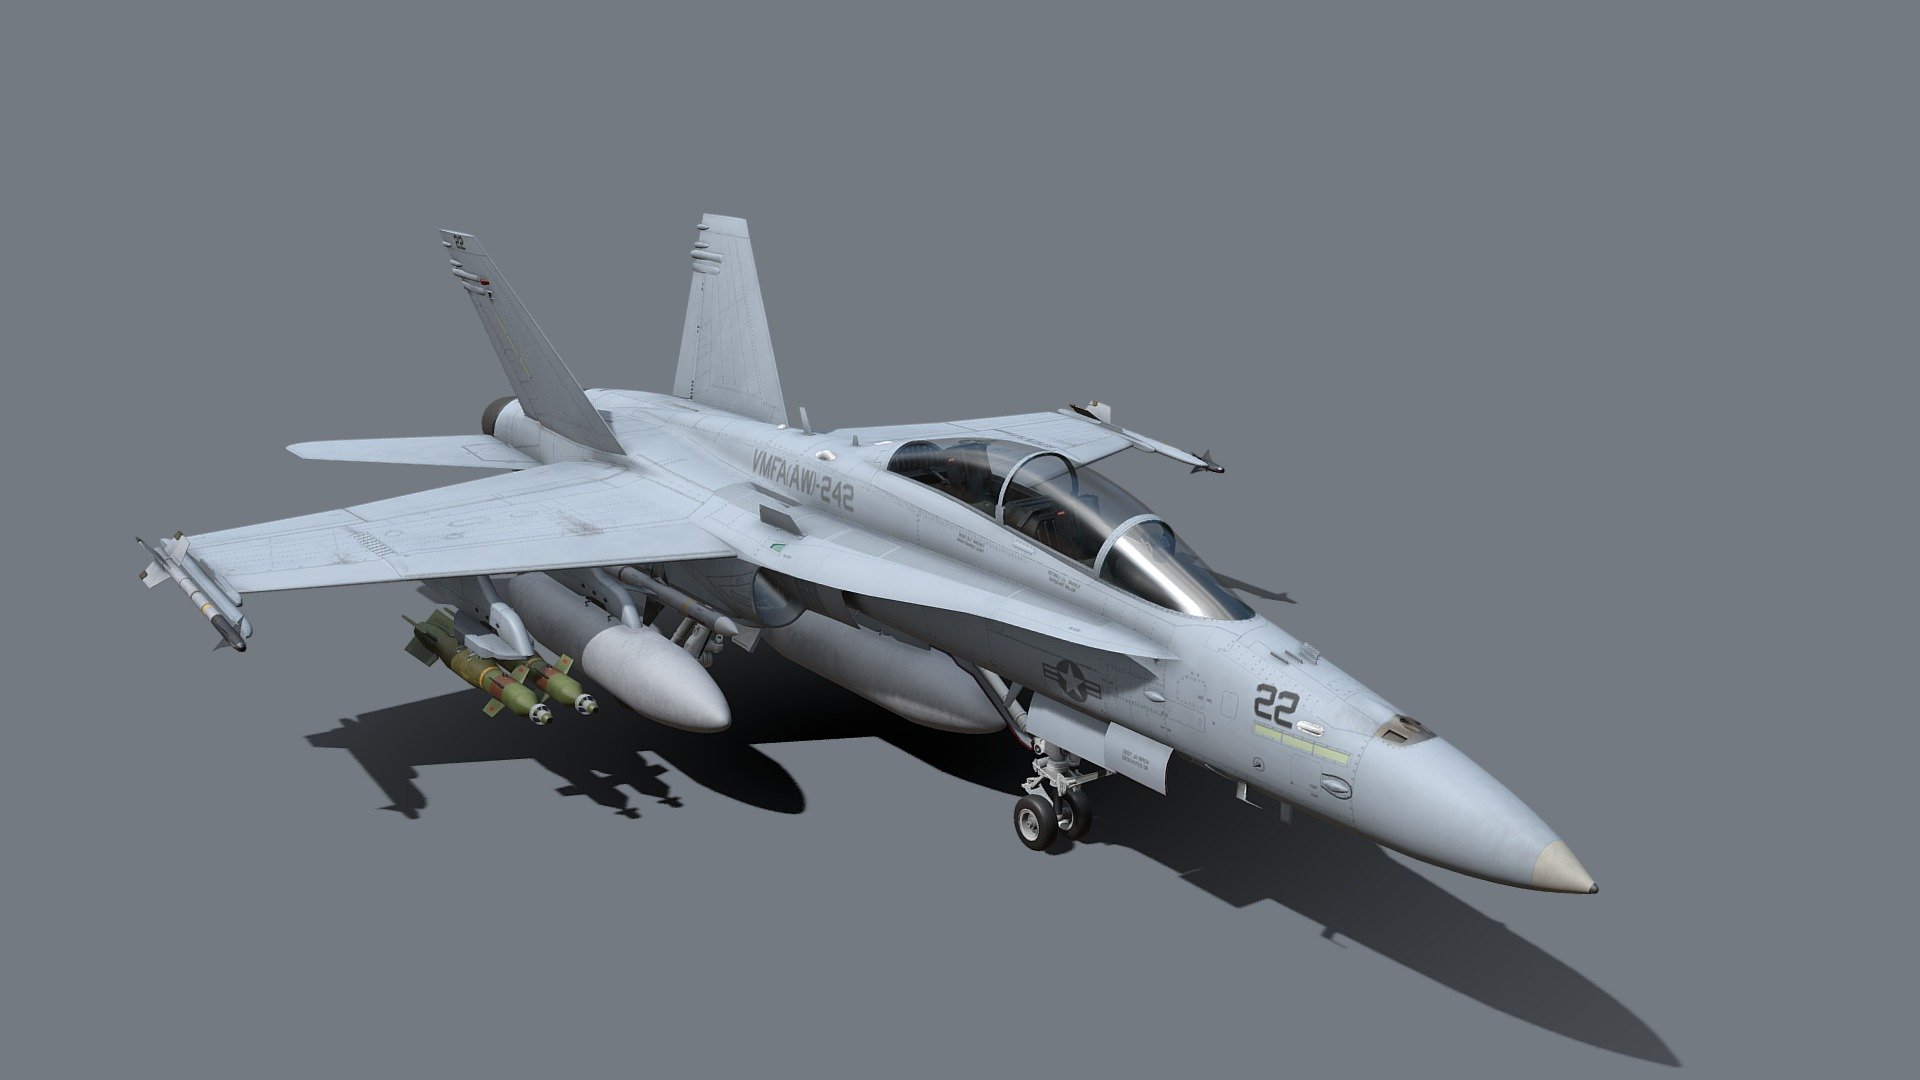 The McDonnell Douglas F/A-18 Hornet is an all-weather, twin-engine, carrier-capable, multirole combat aircraft, designed as both a fighter and attack aircraft (hence the F/A designation). Designed by McDonnell Douglas and Northrop, the F/A-18 was derived from the latter’s YF-17 in the 1970s for use by the United States Navy and Marine Corps 3d model